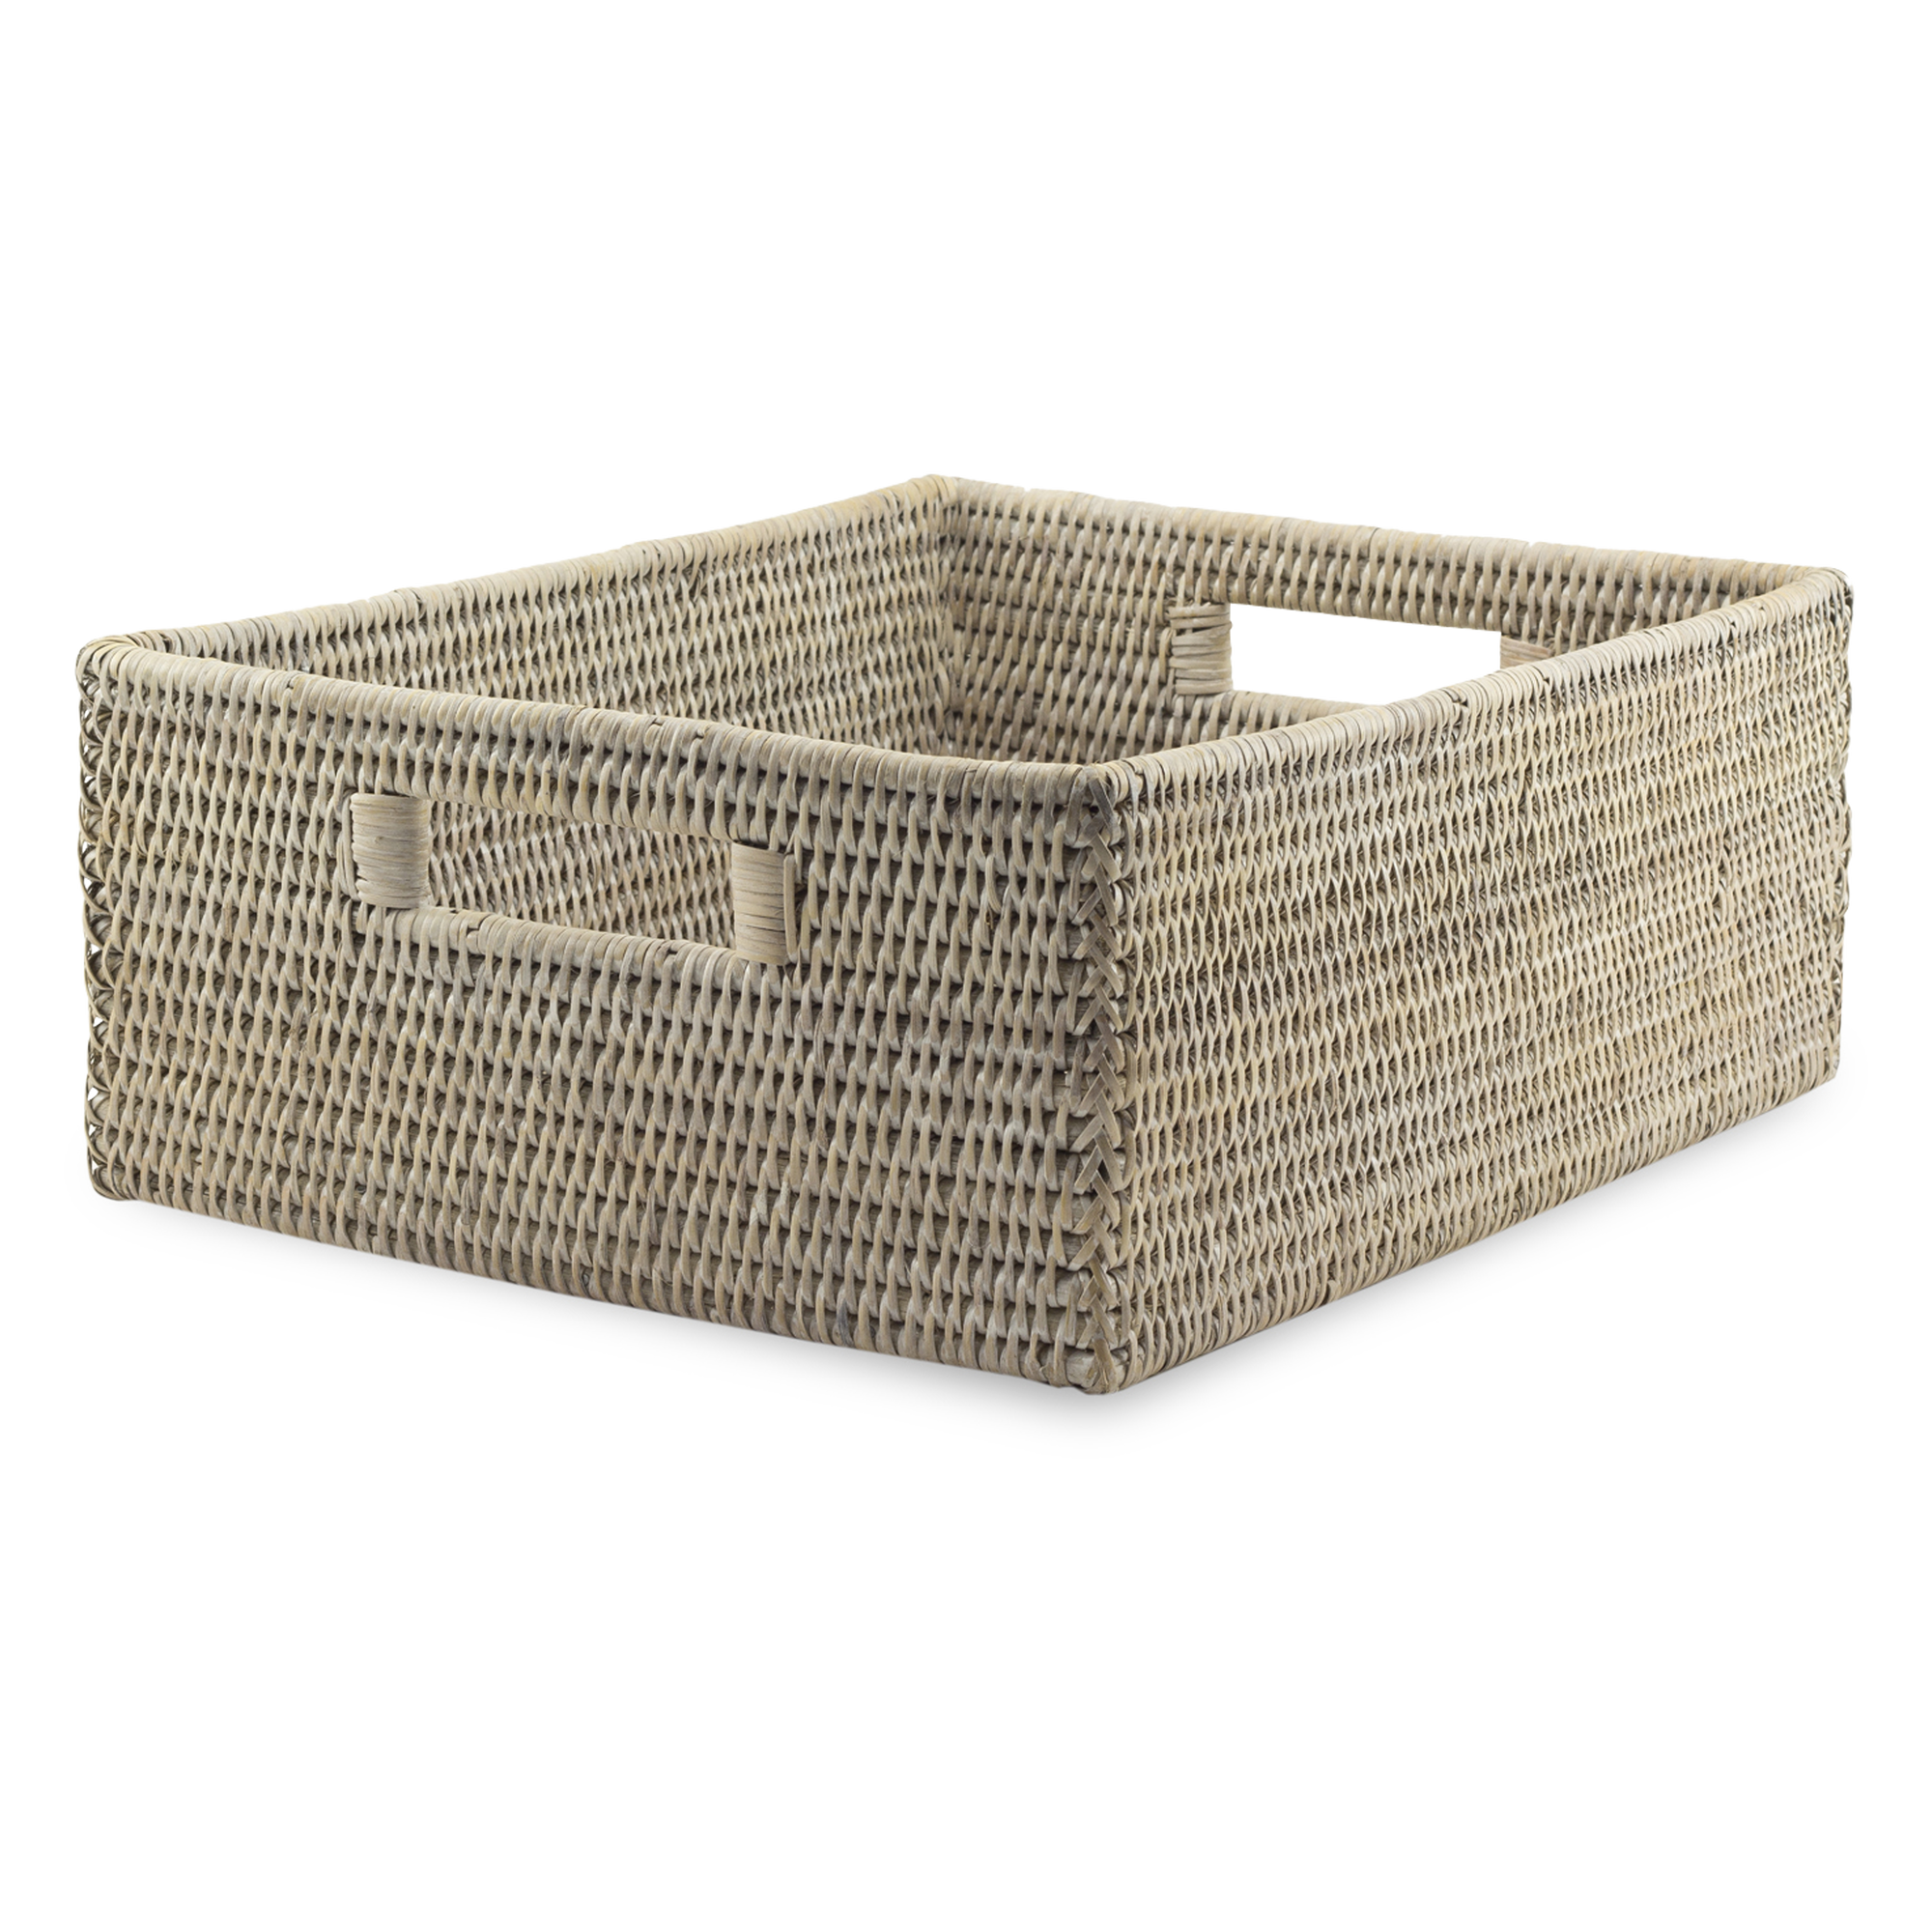 The Tamiko collection of rattan accessories is made in Myanmar under fair trade conditions.